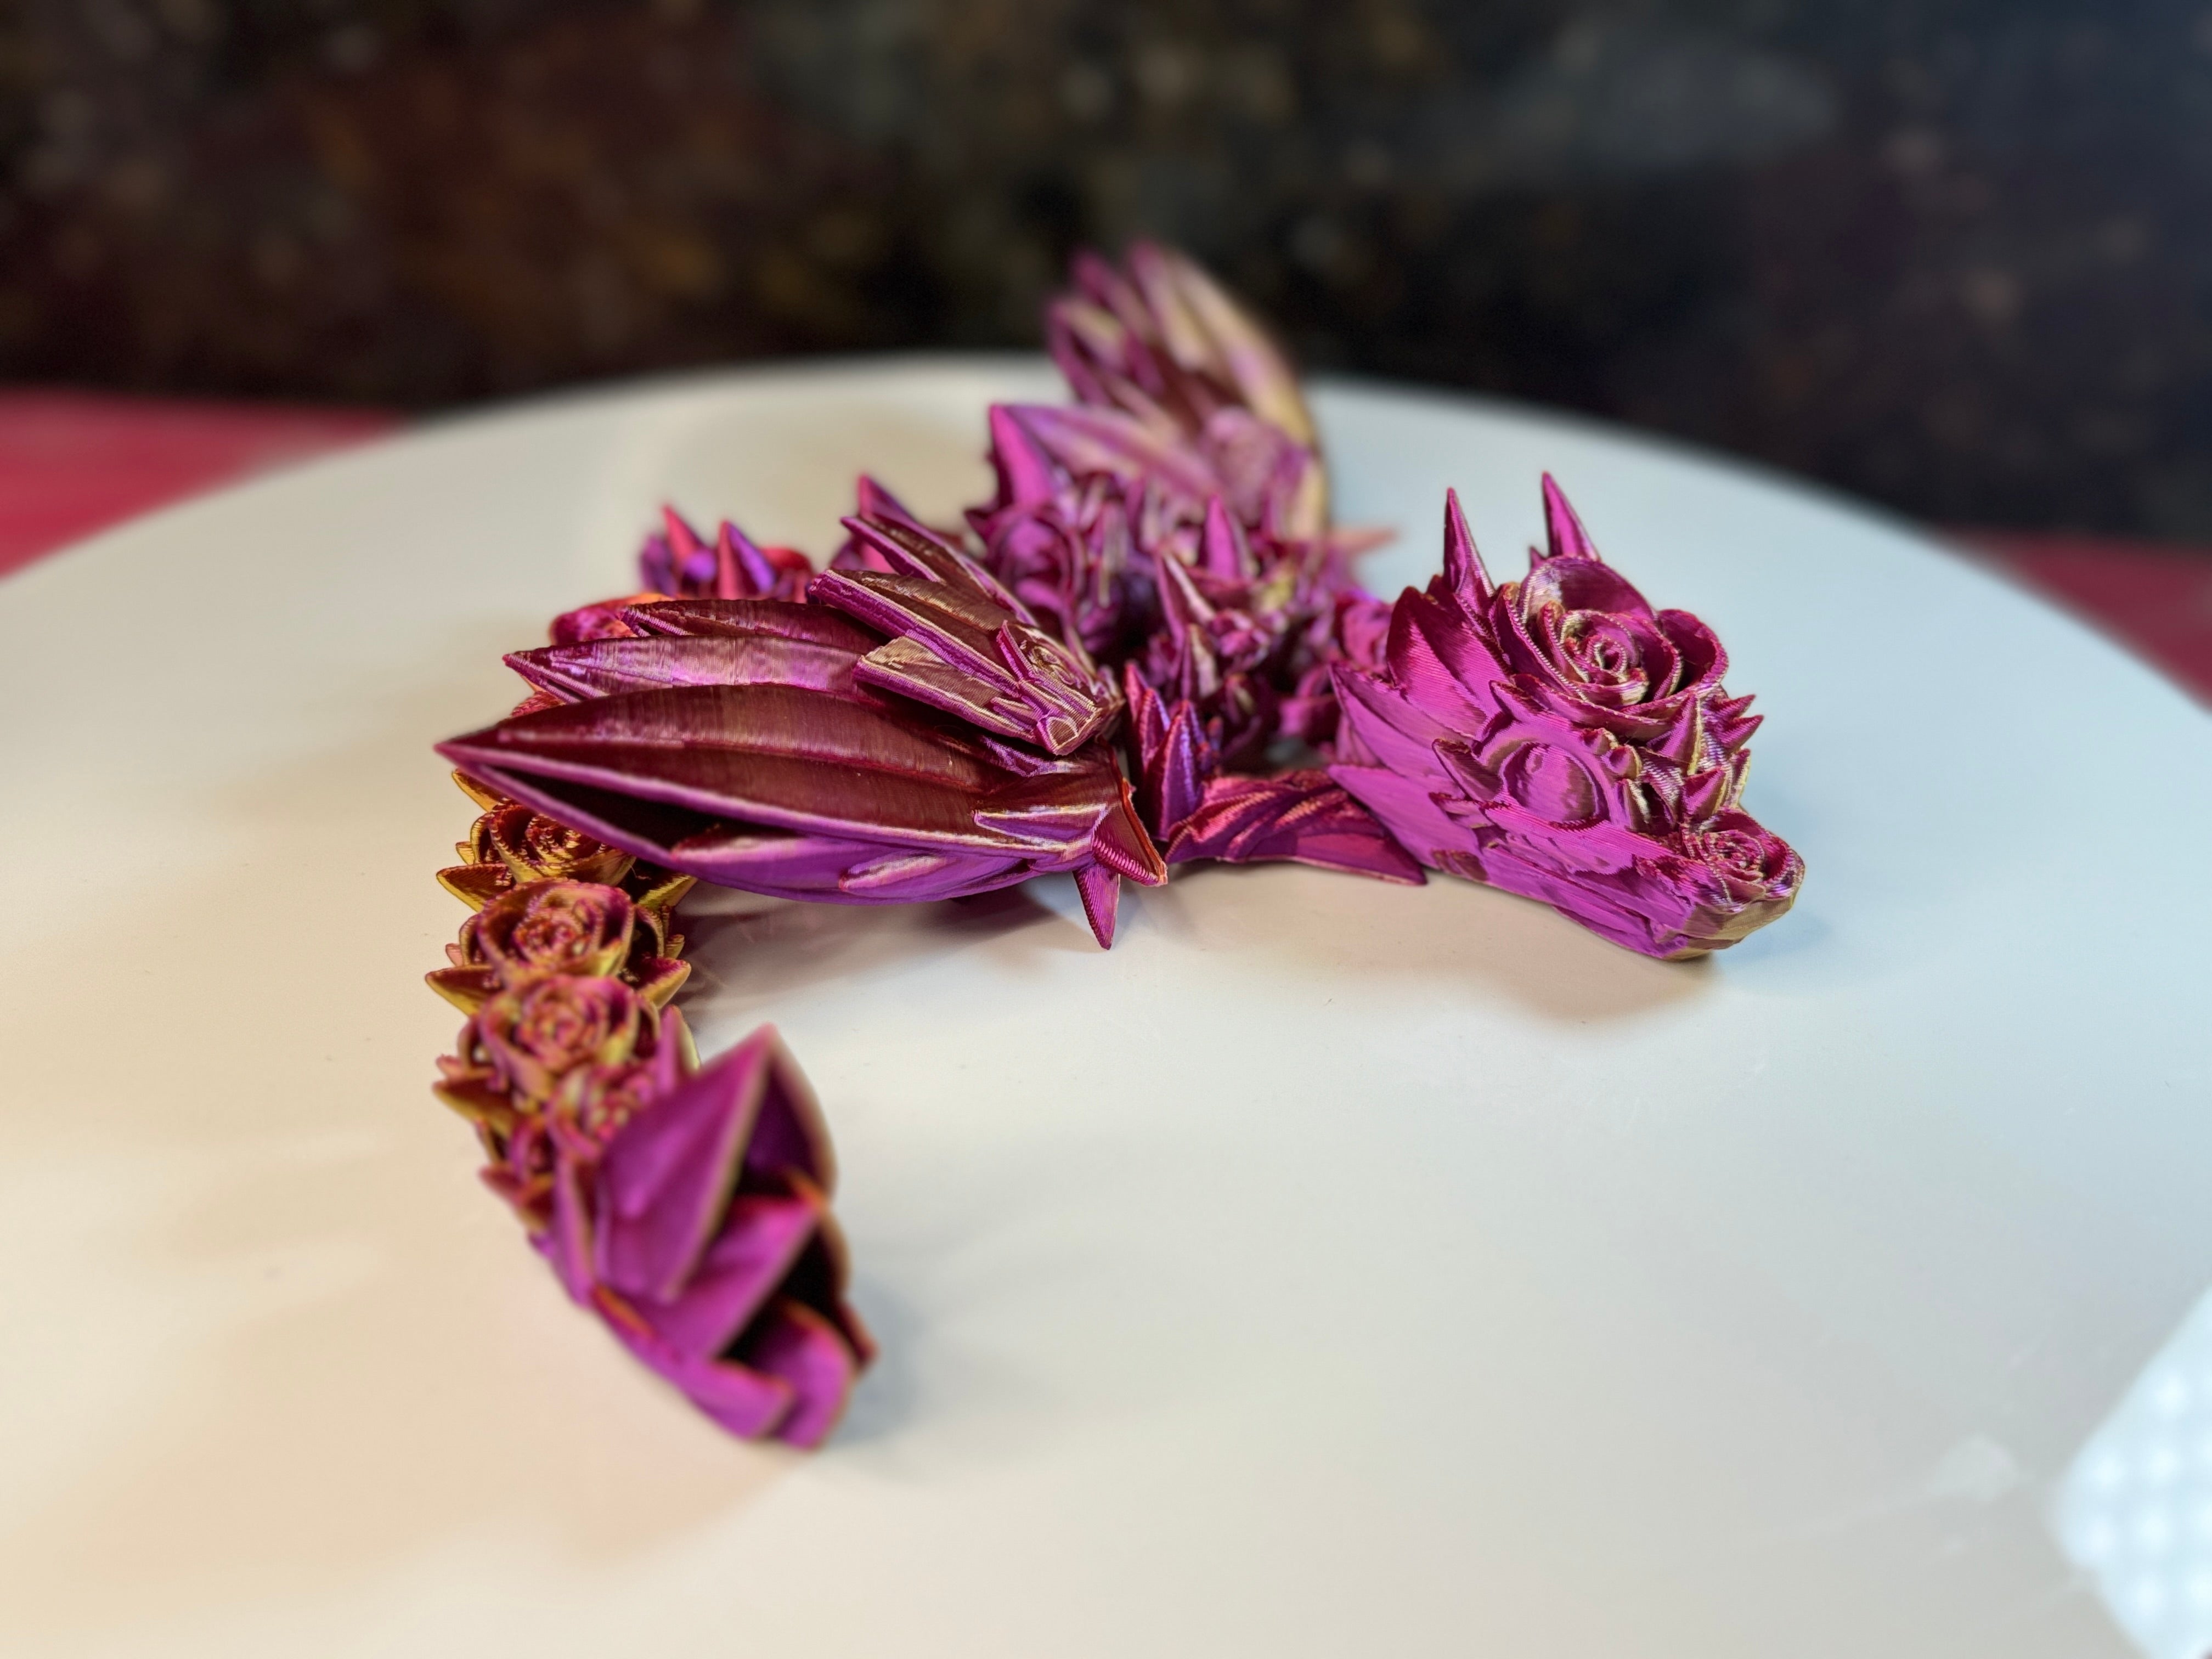 3D Rose Wing Dragon, Pin Purple Glitter Color, desk toy, fidget toy, gift for rose lover